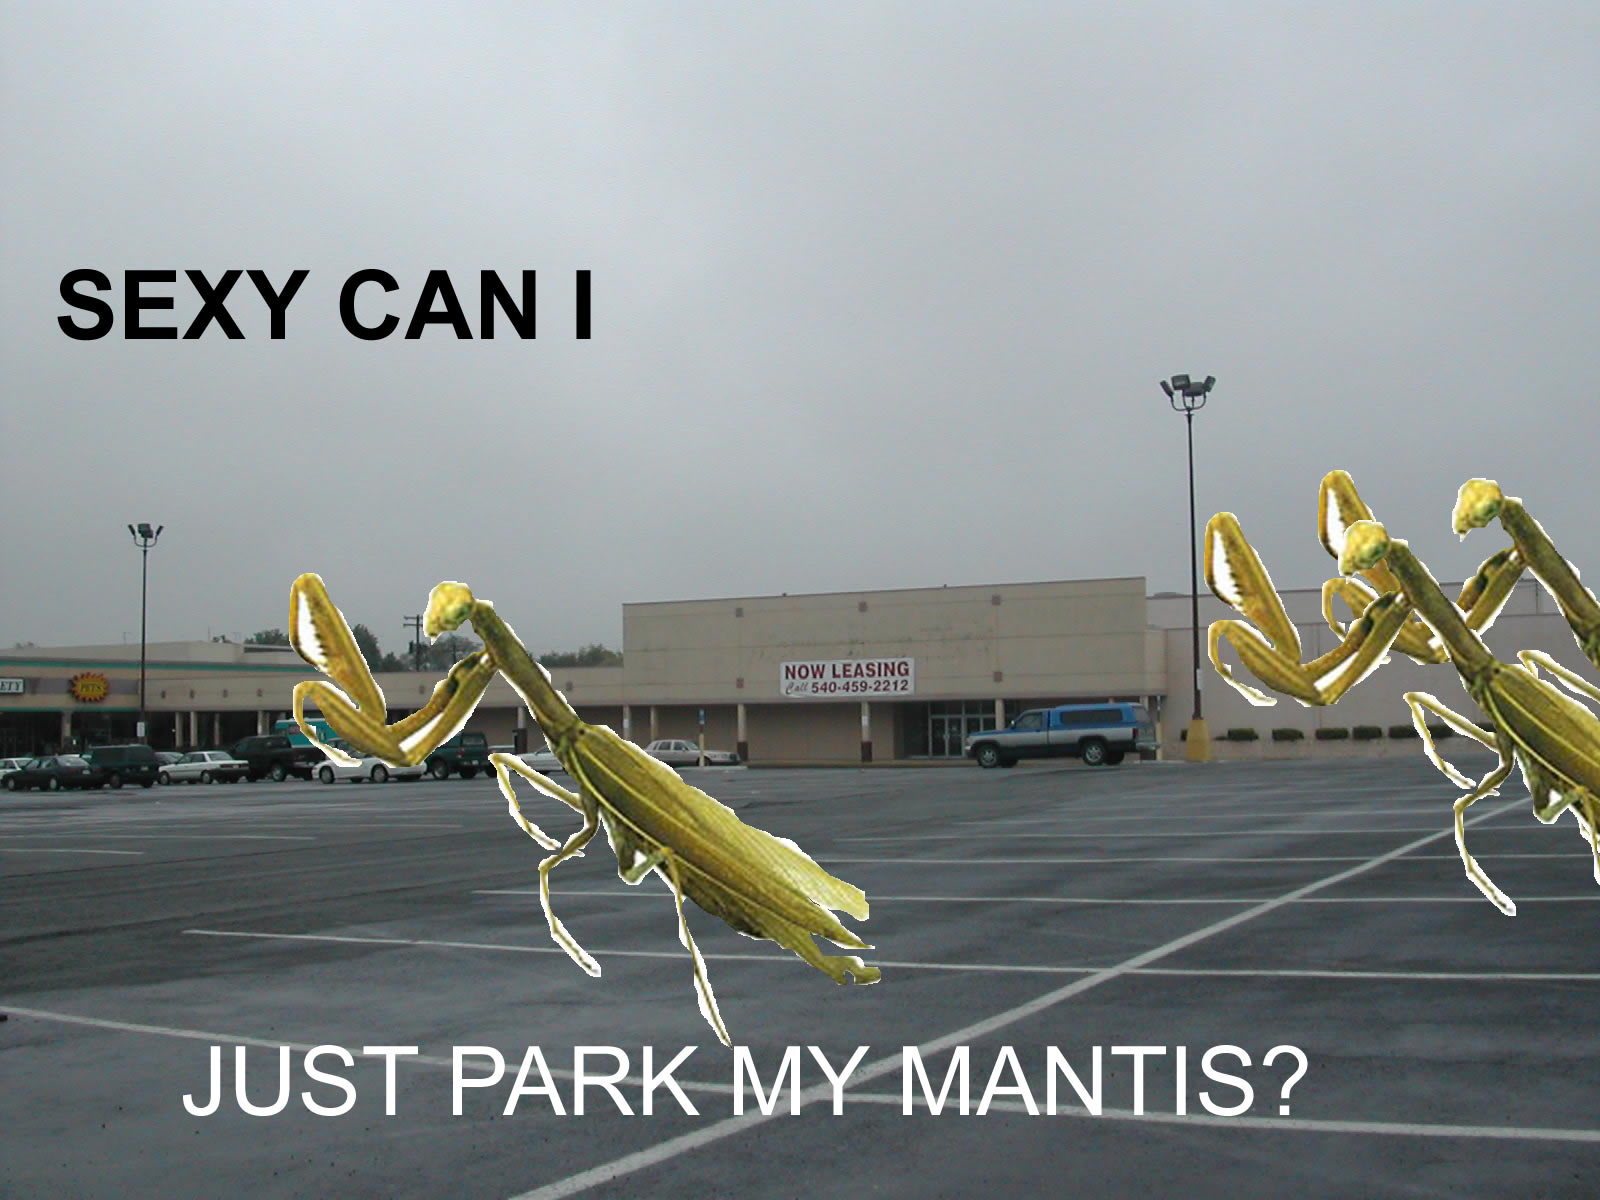 Sexy can I just park my mantis?